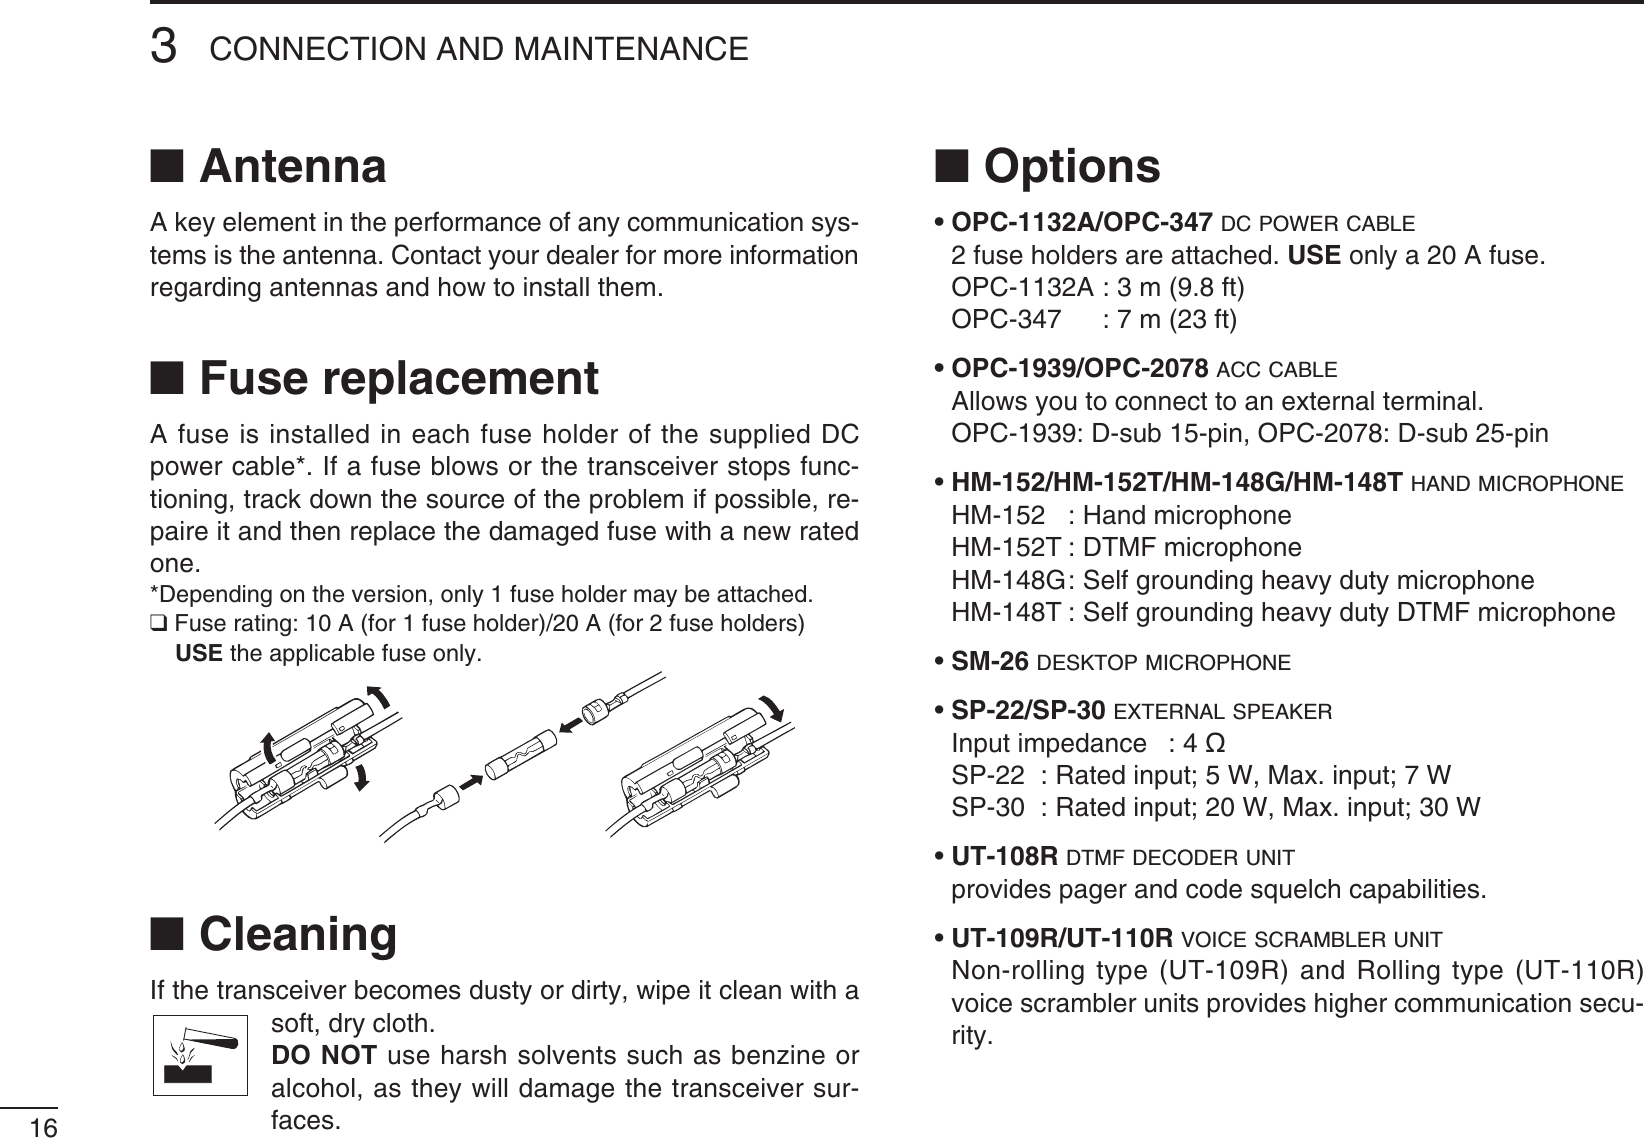 163CONNECTION AND MAINTENANCEN AntennaA key element in the performance of any communication sys-tems is the antenna. Contact your dealer for more information regarding antennas and how to install them.N Fuse replacementA fuse is installed in each fuse holder of the supplied DC power cable*. If a fuse blows or the transceiver stops func-tioning, track down the source of the problem if possible, re-paire it and then replace the damaged fuse with a new rated one.*Depending on the version, only 1 fuse holder may be attached.Q&amp;USERATING!FORFUSEHOLDER!FORFUSEHOLDERS USE the applicable fuse only.N CleaningIf the transceiver becomes dusty or dirty, wipe it clean with a soft, dry cloth. DO NOT use harsh solvents such as benzine or alcohol, as they will damage the transceiver sur-faces.N Optionss/0#!/0#DC POWER CABLE 2 fuse holders are attached. USE only a 20 A fuse.  OPC-1132A : 3 m (9.8 ft)   OPC-347  : 7 m (23 ft)s/0#/0#ACC CABLE !LLOWSYOUTOCONNECTTOANEXTERNALTERMINAL  OPC-1939: D-sub 15-pin, OPC-2078: D-sub 25-pinsHM-152/HM-152T/HM-148G/HM-148T HAND MICROPHONE HM-152  :  Hand microphone  HM-152T : DTMF microphone HM-148G :  Self grounding heavy duty microphone HM-148T :  Self grounding heavy duty DTMF microphonesSM-26 DESKTOP MICROPHONEsSP-22/SP-30 EXTERNAL SPEAKER  Input impedance  : 4 ø 30 2ATEDINPUT7-AXINPUT7 30 2ATEDINPUT7-AXINPUT7sUT-108R DTMF DECODER UNIT  provides pager and code squelch capabilities.sUT-109R/UT-110R VOICE SCRAMBLER UNIT  Non-rolling type (UT-109R) and Rolling type (UT-110R) voice scrambler units provides higher communication secu-rity.